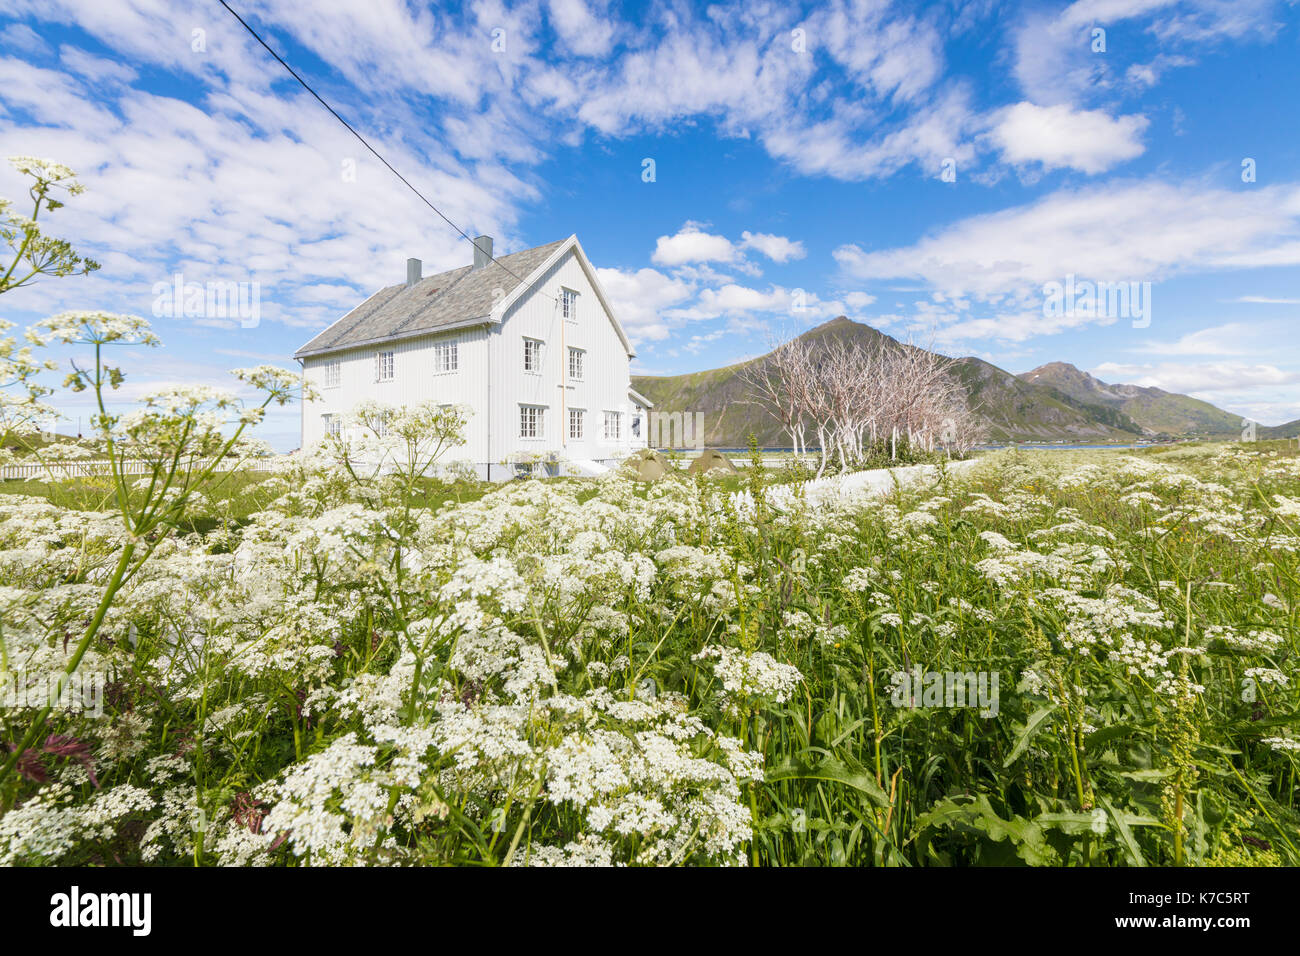 Field of blooming flowers frame the typical wooden house surrounded by peaks and blue sea Flakstad Lofoten Islands Norway Europe Stock Photo